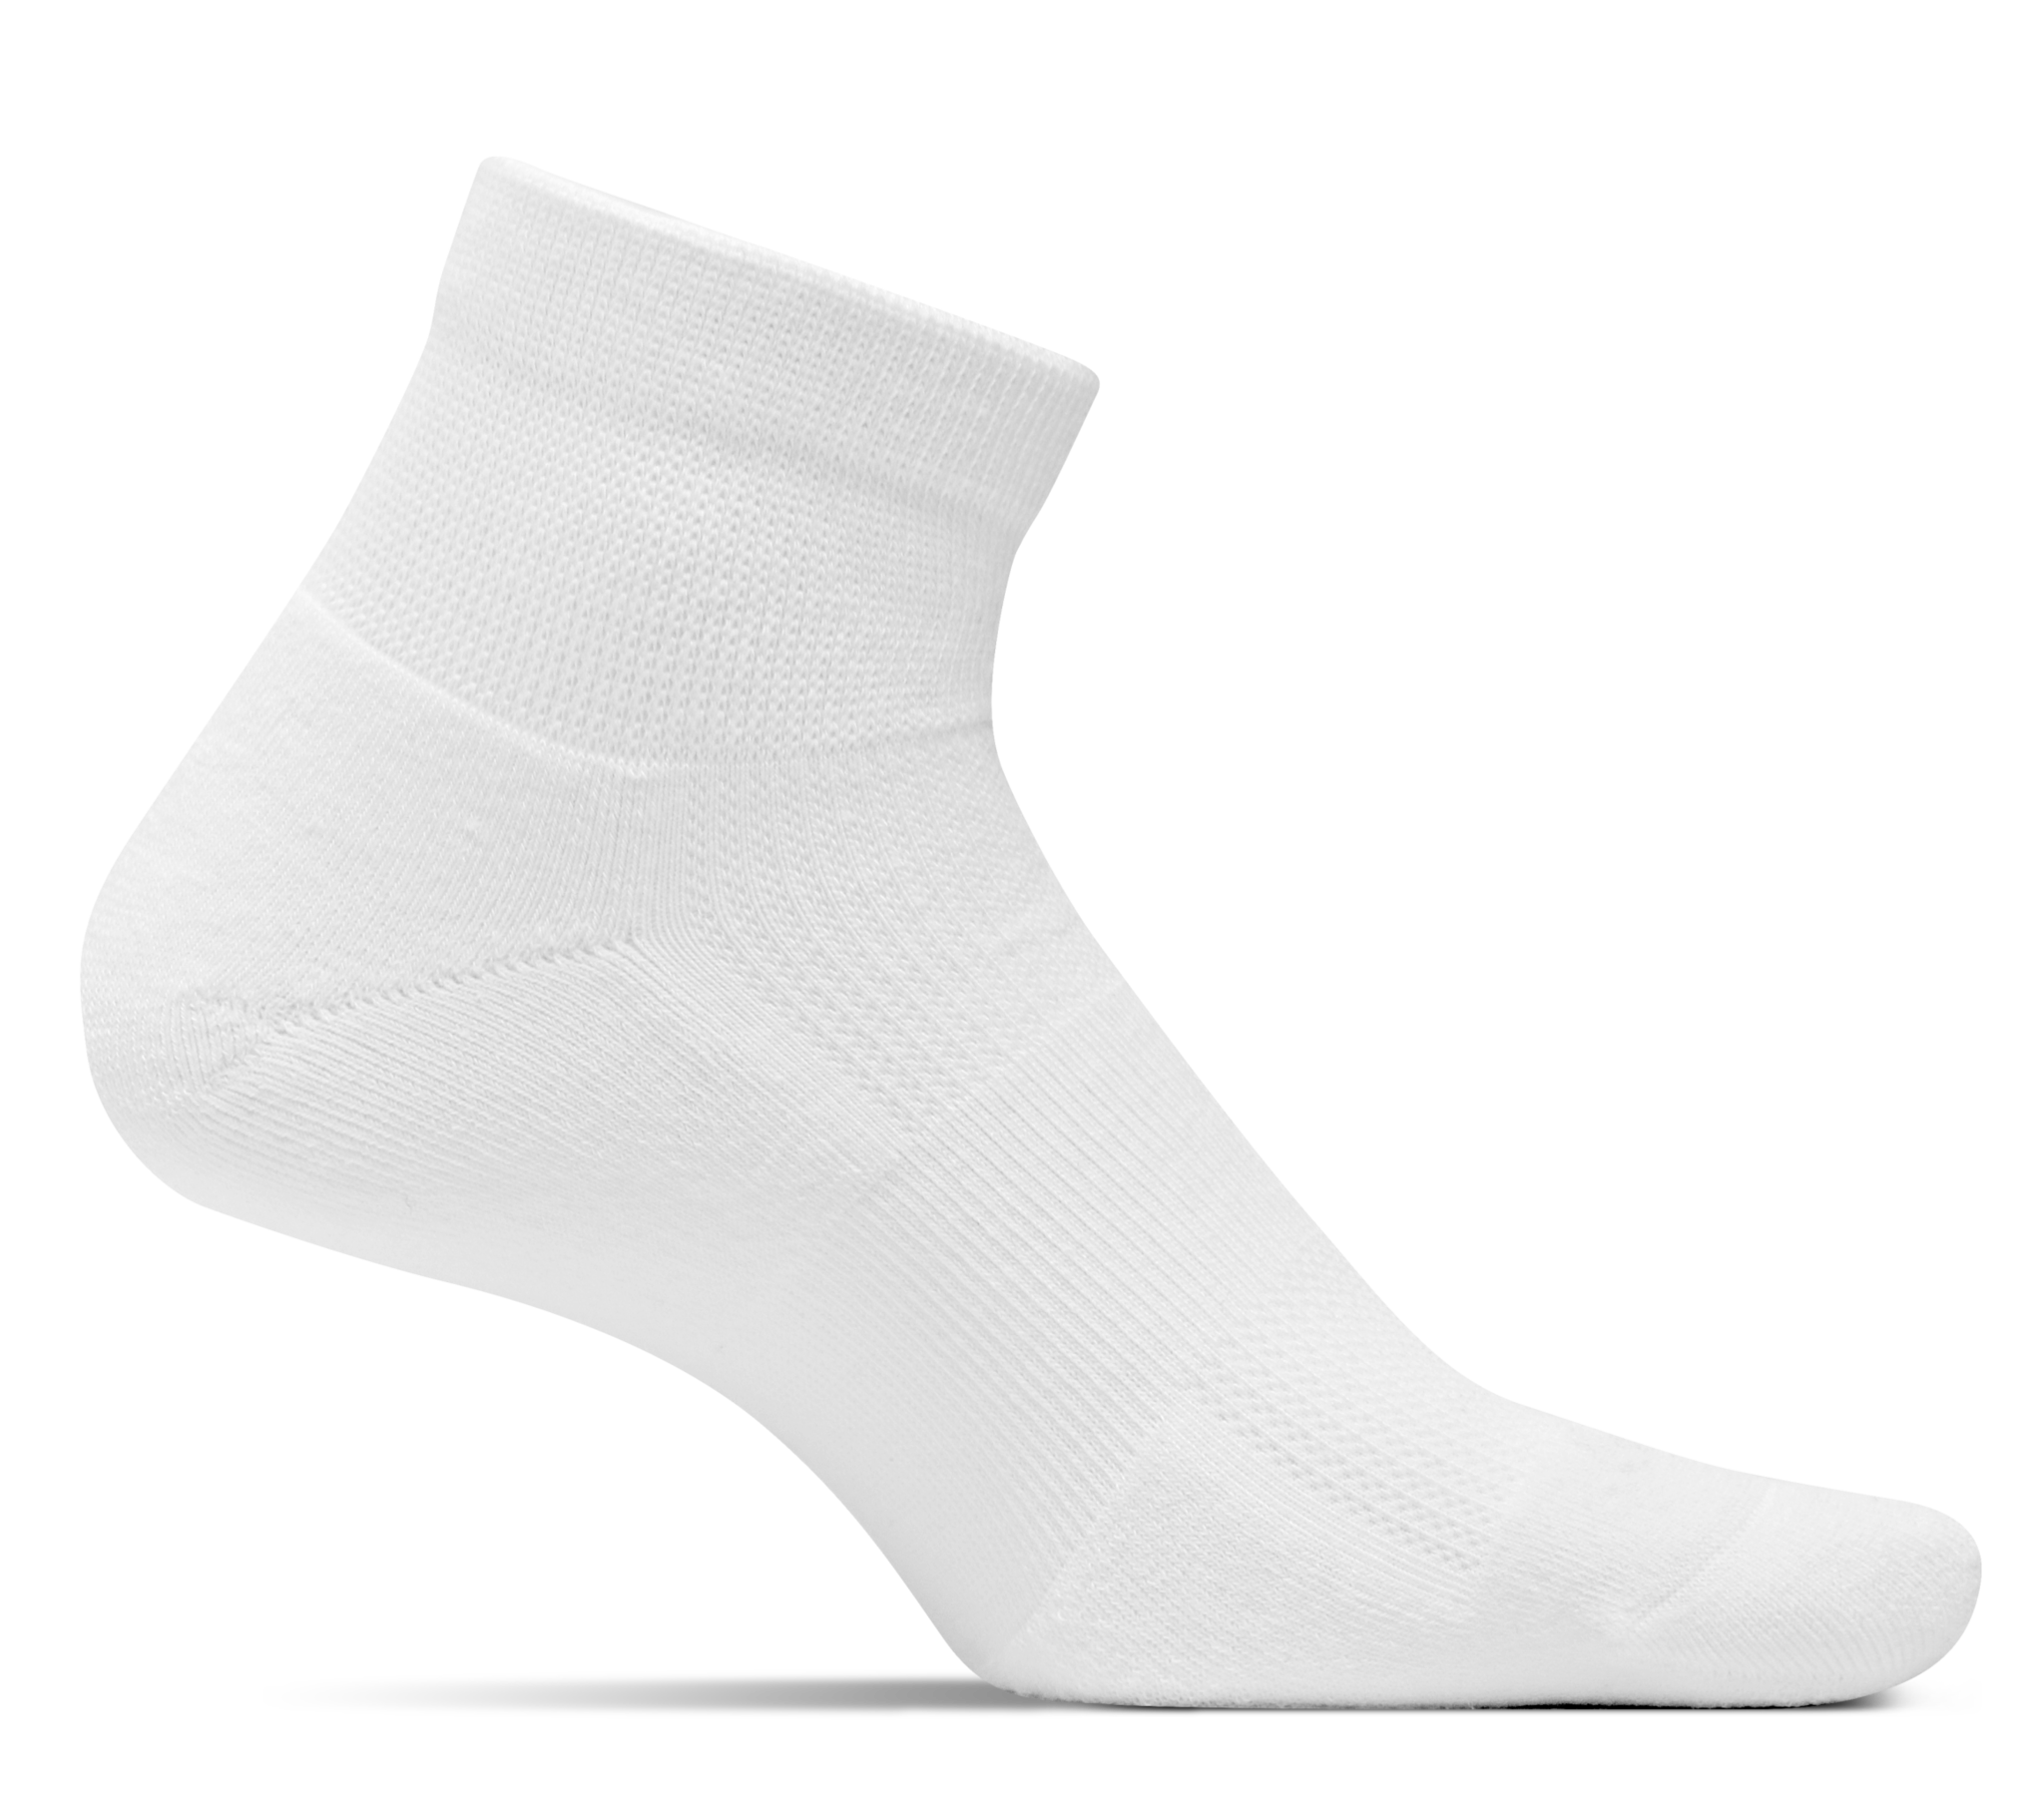 Medial view of the Feetures Diabetic Quarter height sock in the color white.